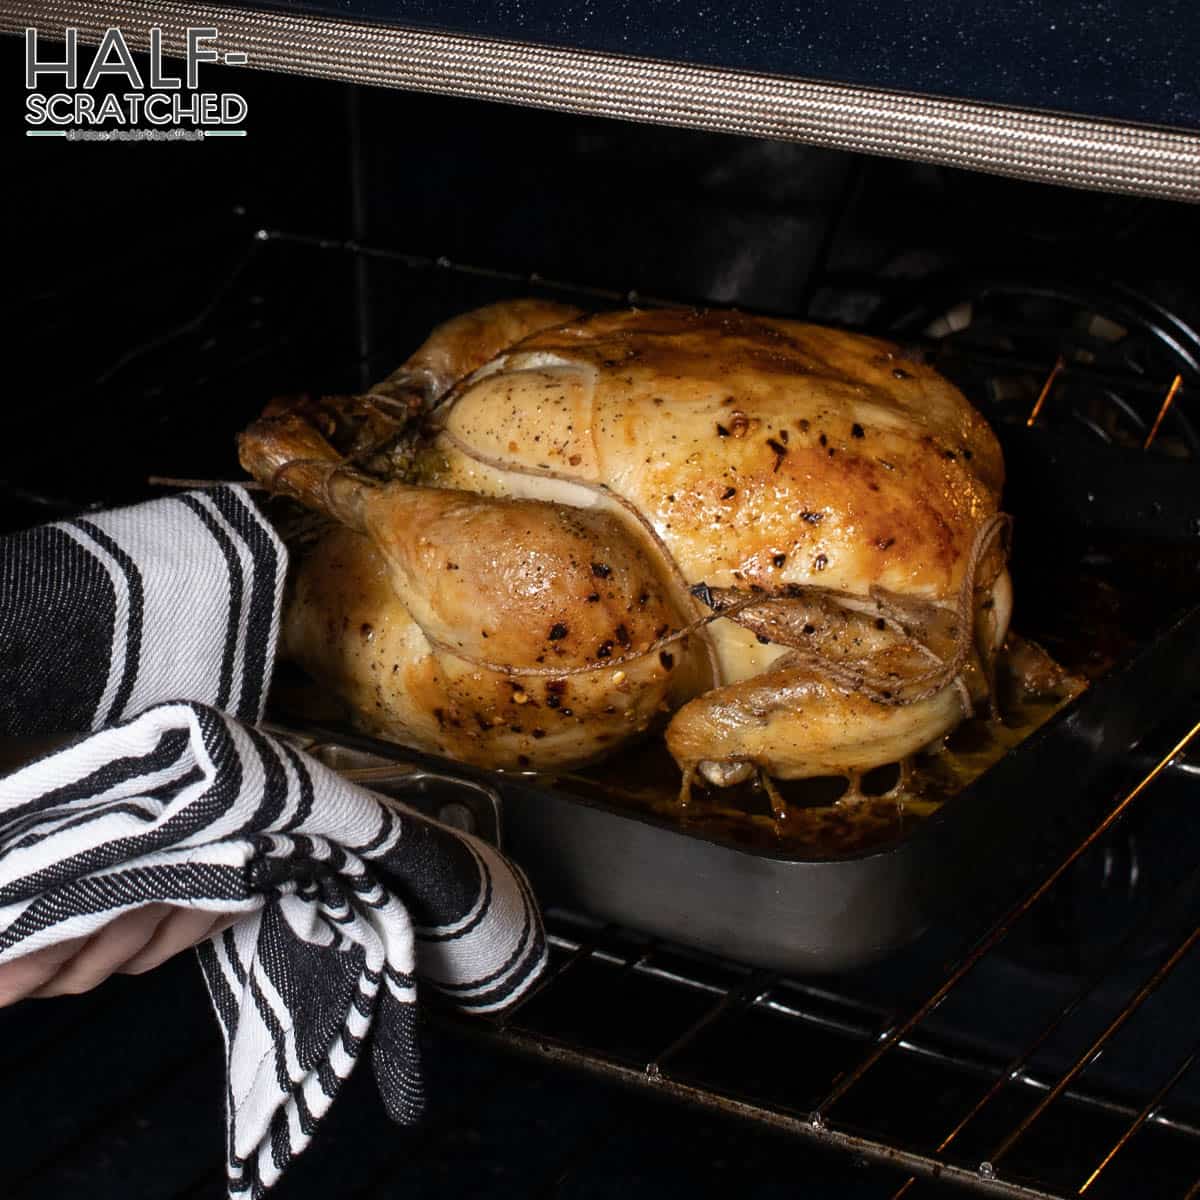 Roast whole chicken in oven